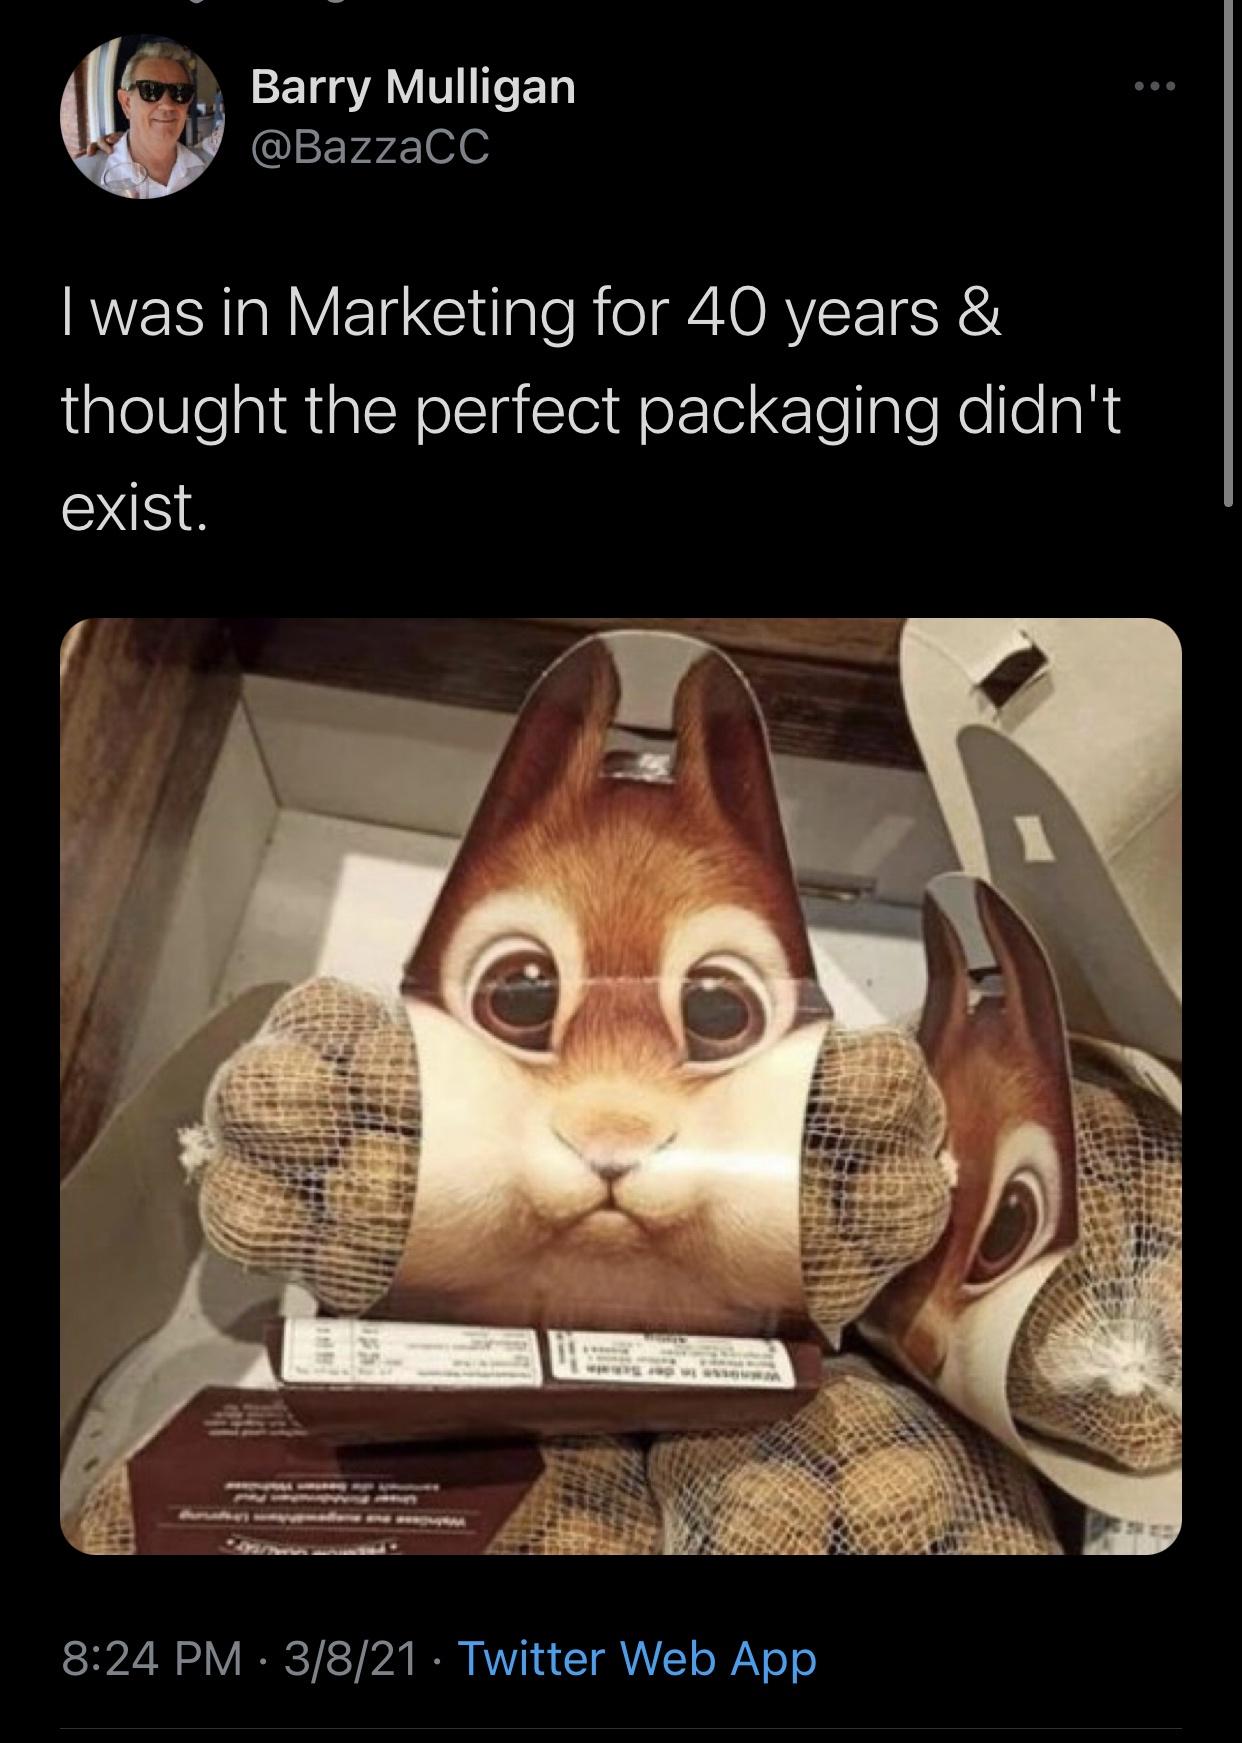 awesome pics and funny memes - chipmunk nut packaging - Barry Mulligan I was in Marketing for 40 years & thought the perfect packaging didn't exist. 3821 Twitter Web App